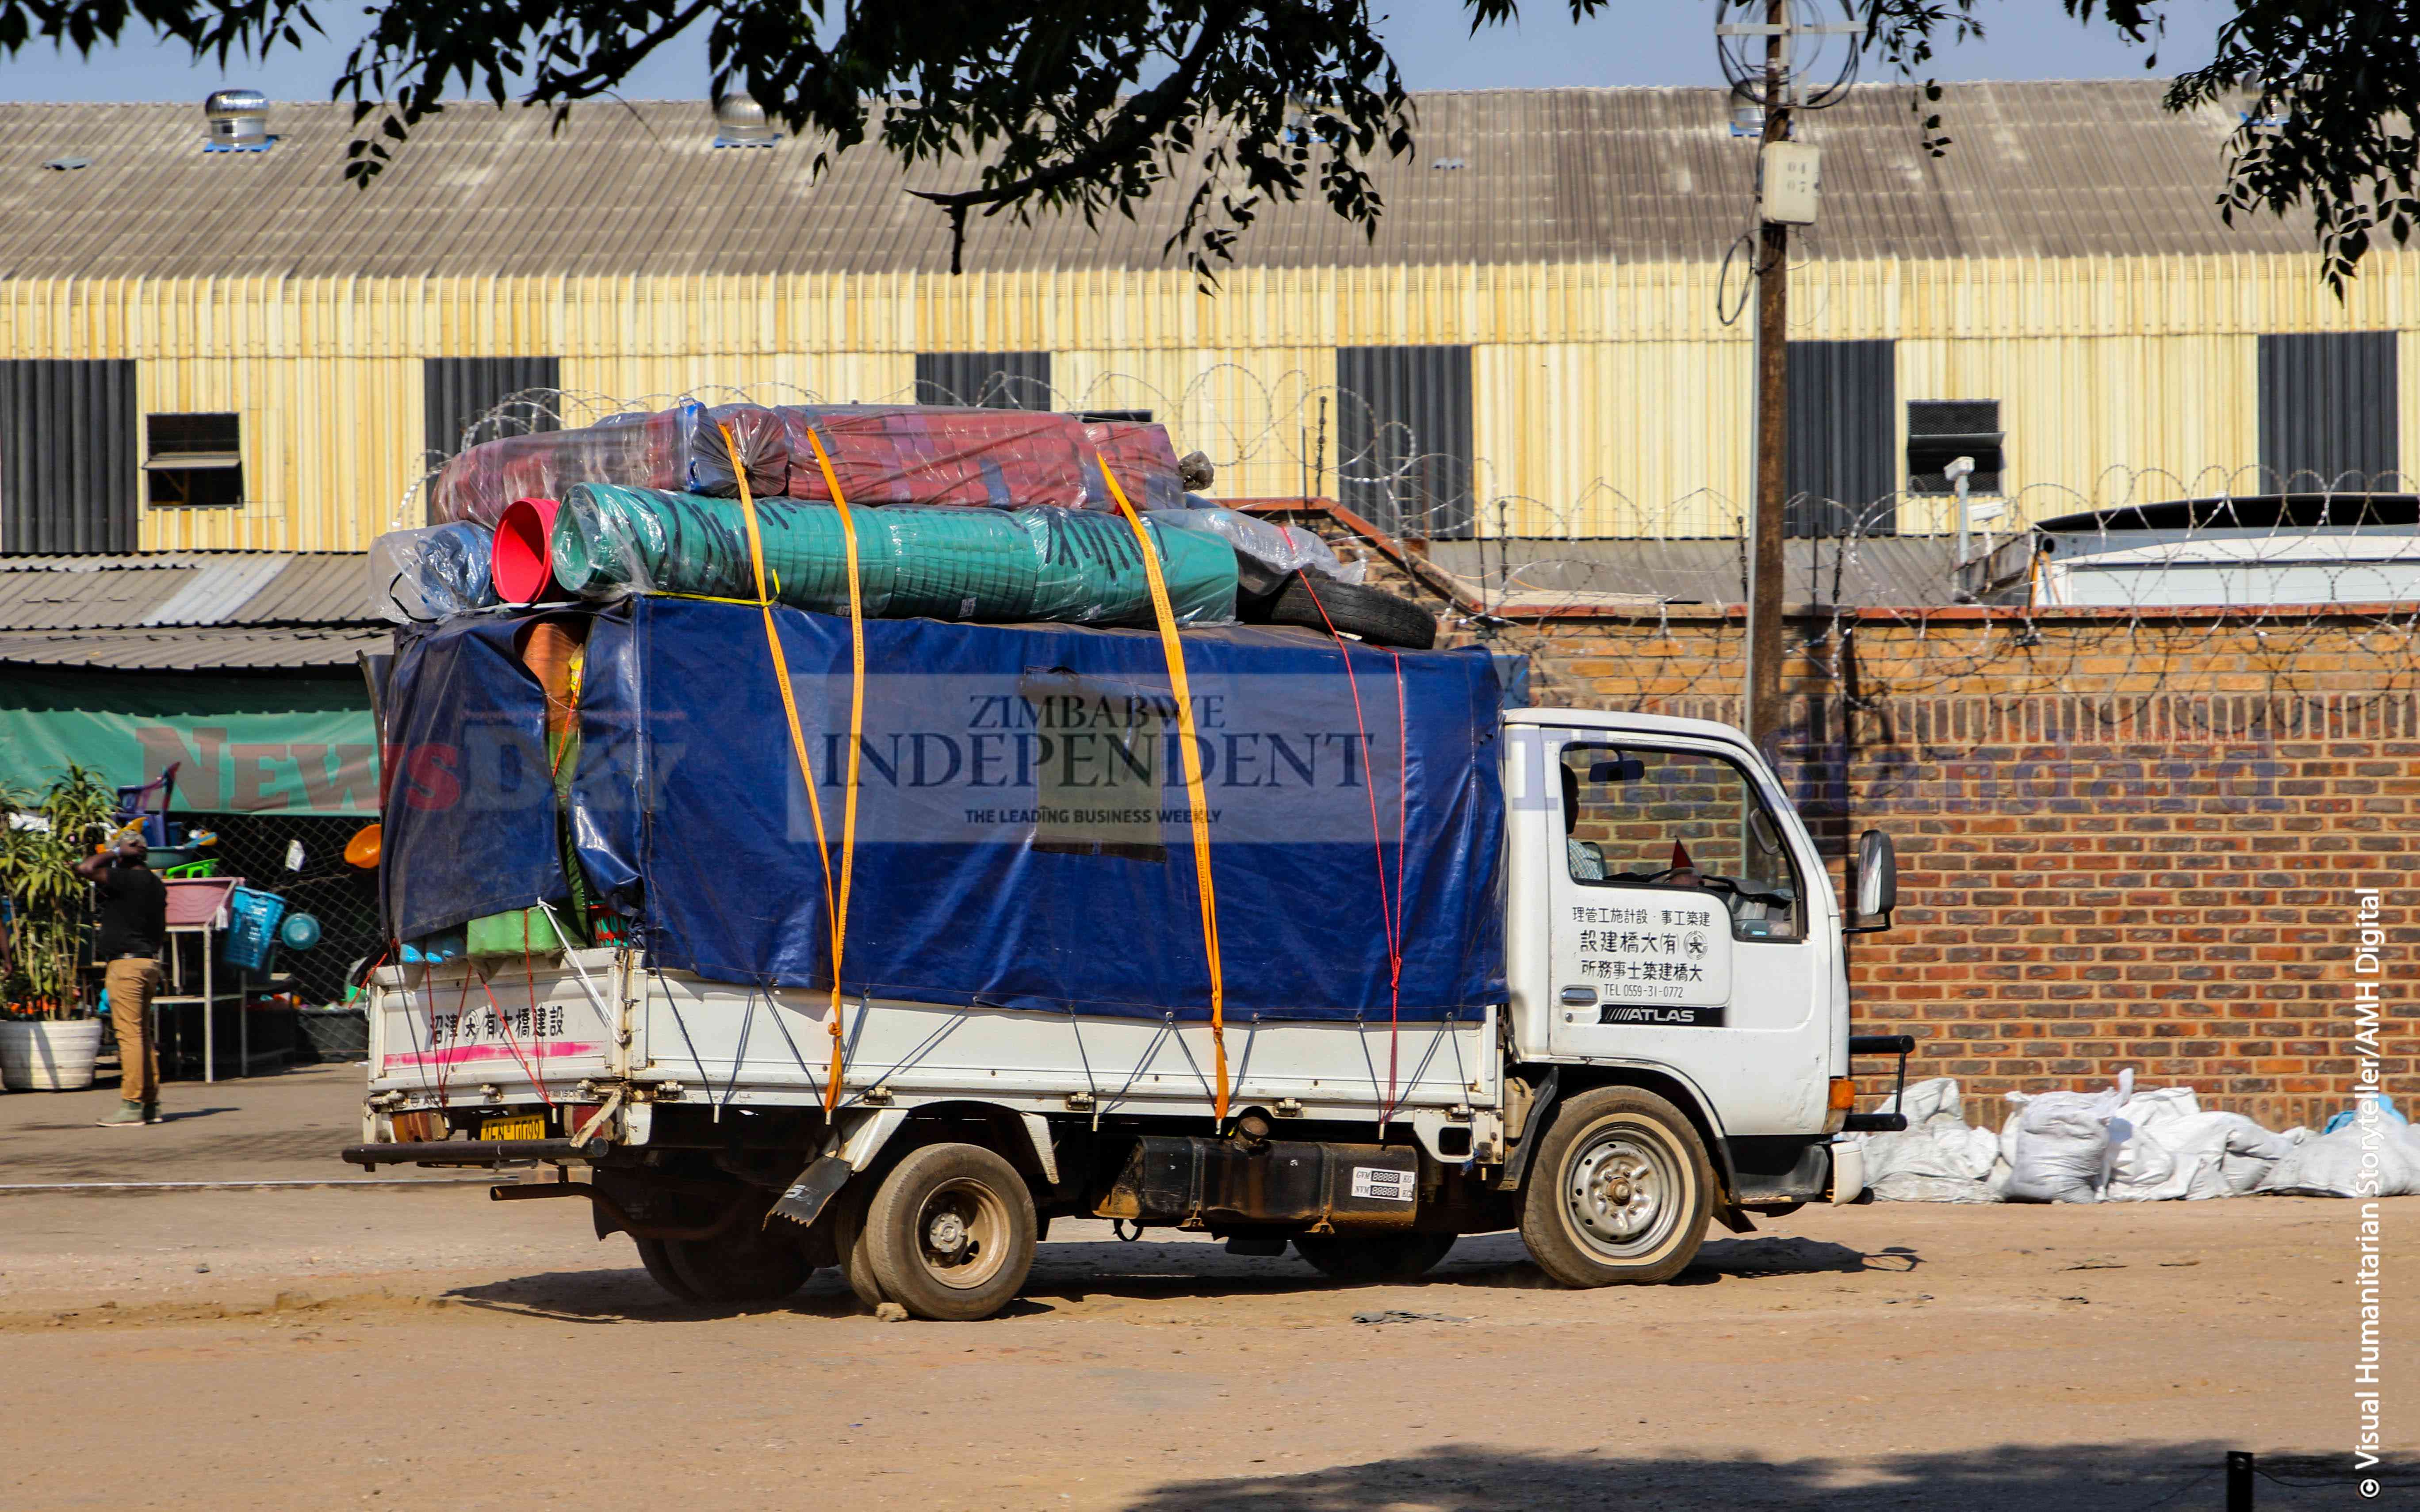 A motor vehicle carrying plastic buckets